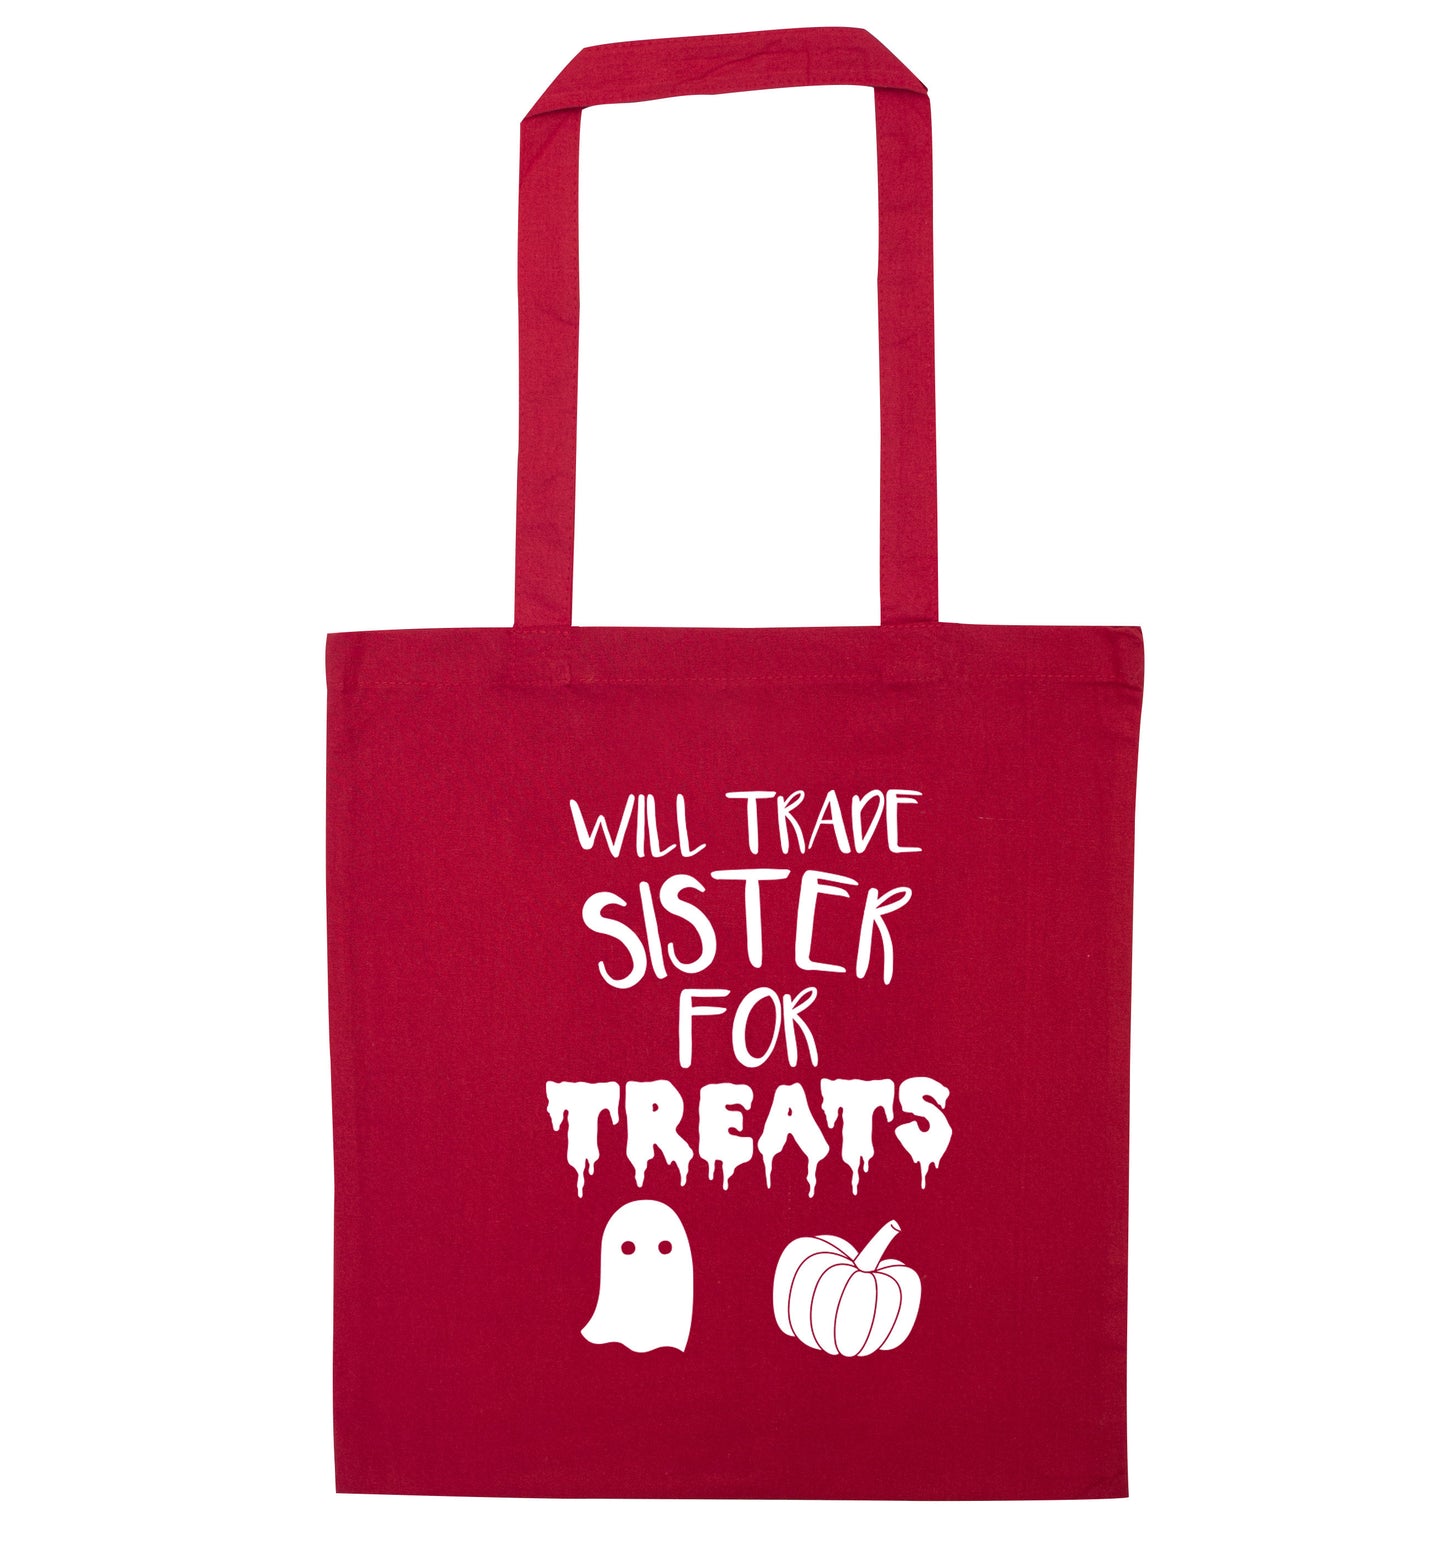 Will trade sister for treats red tote bag